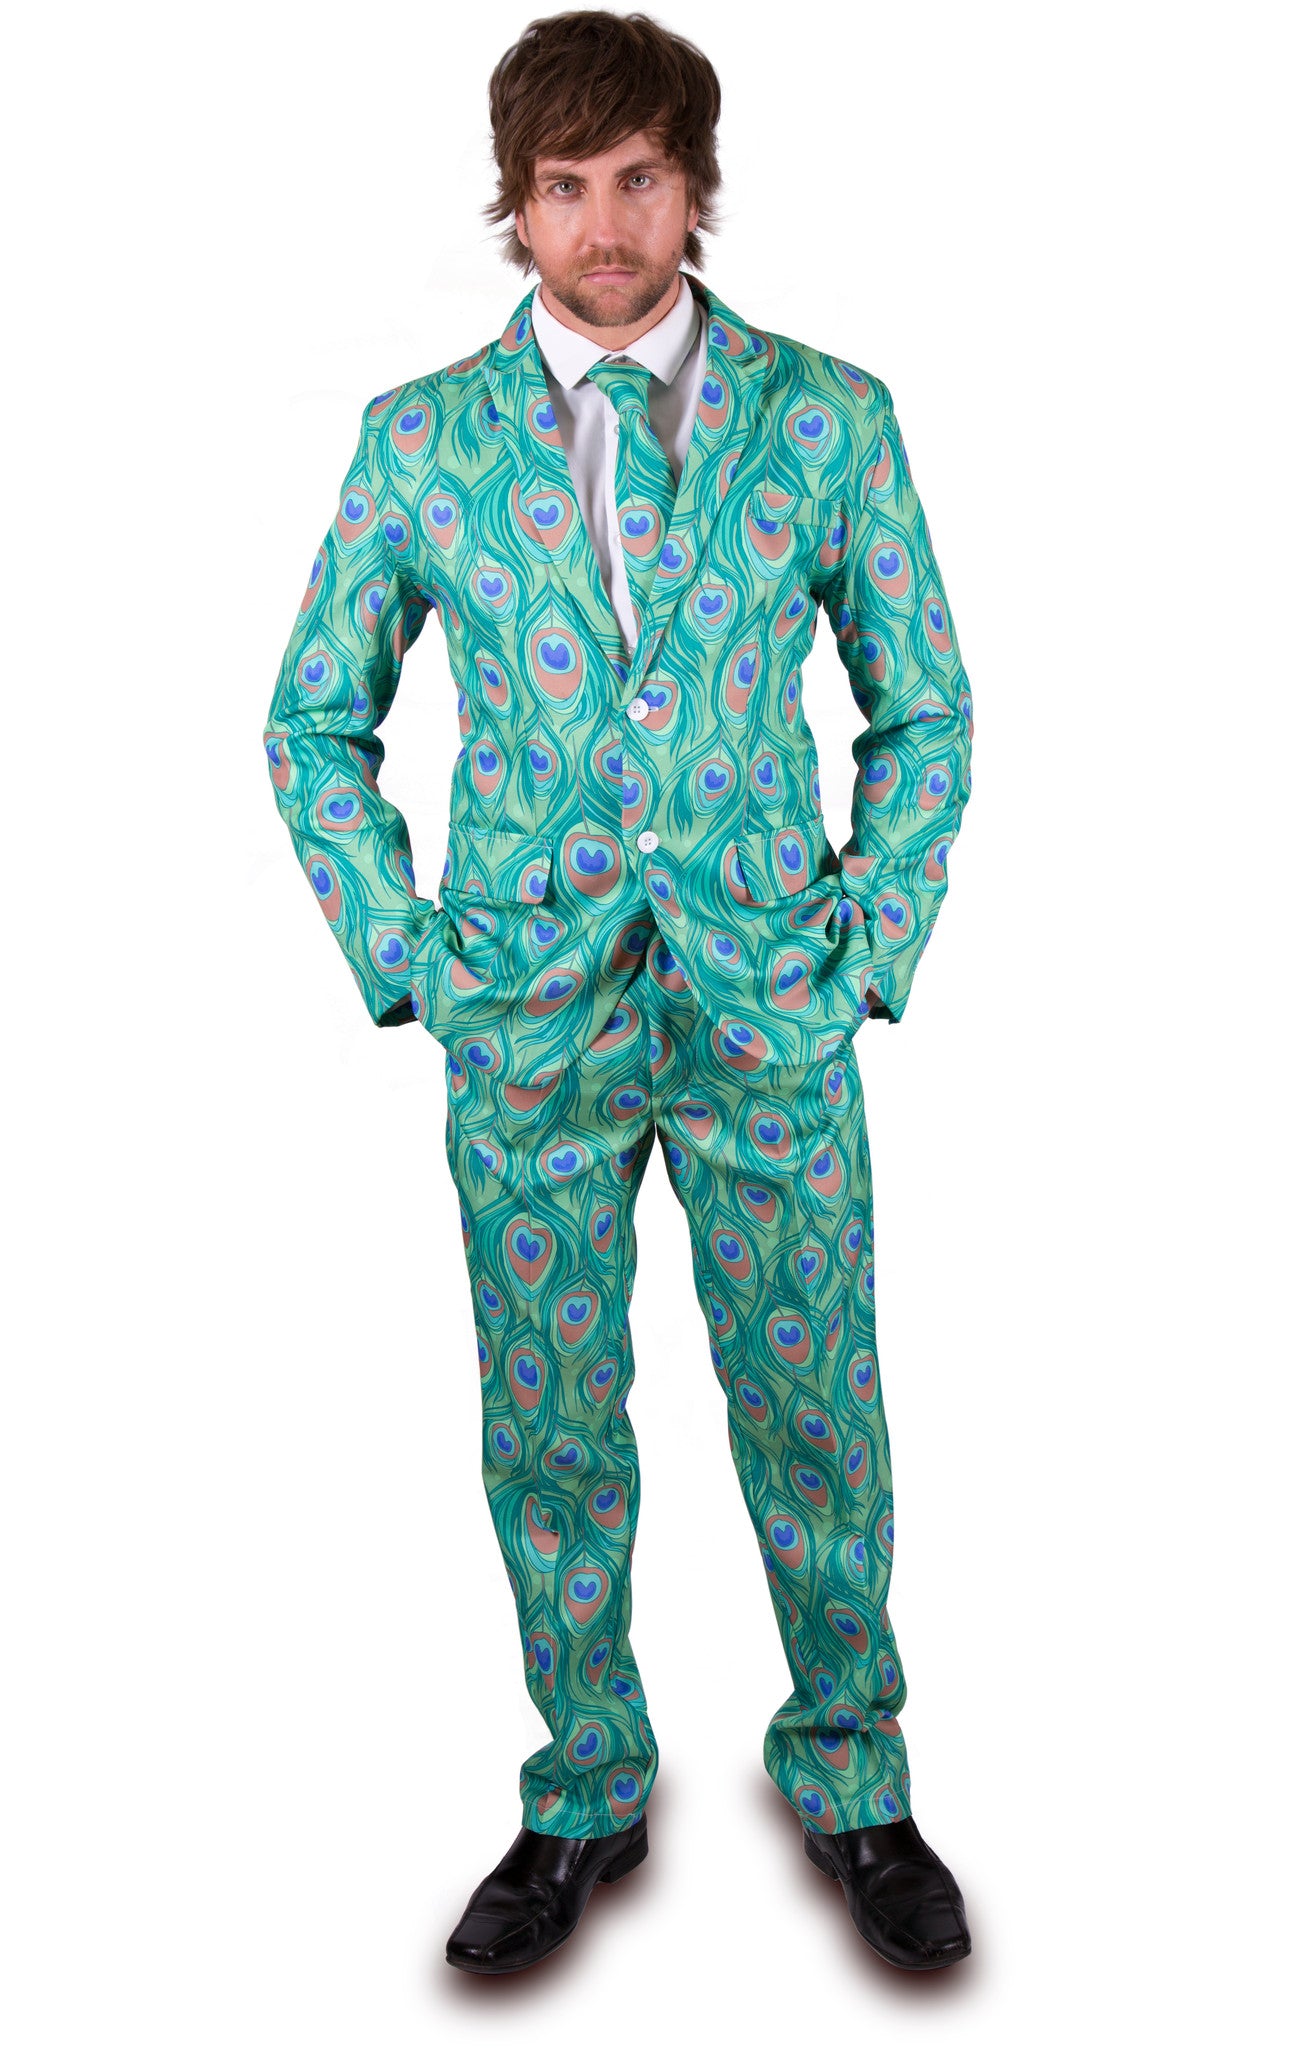 Peacock Print Stag Suit – Stag Suits